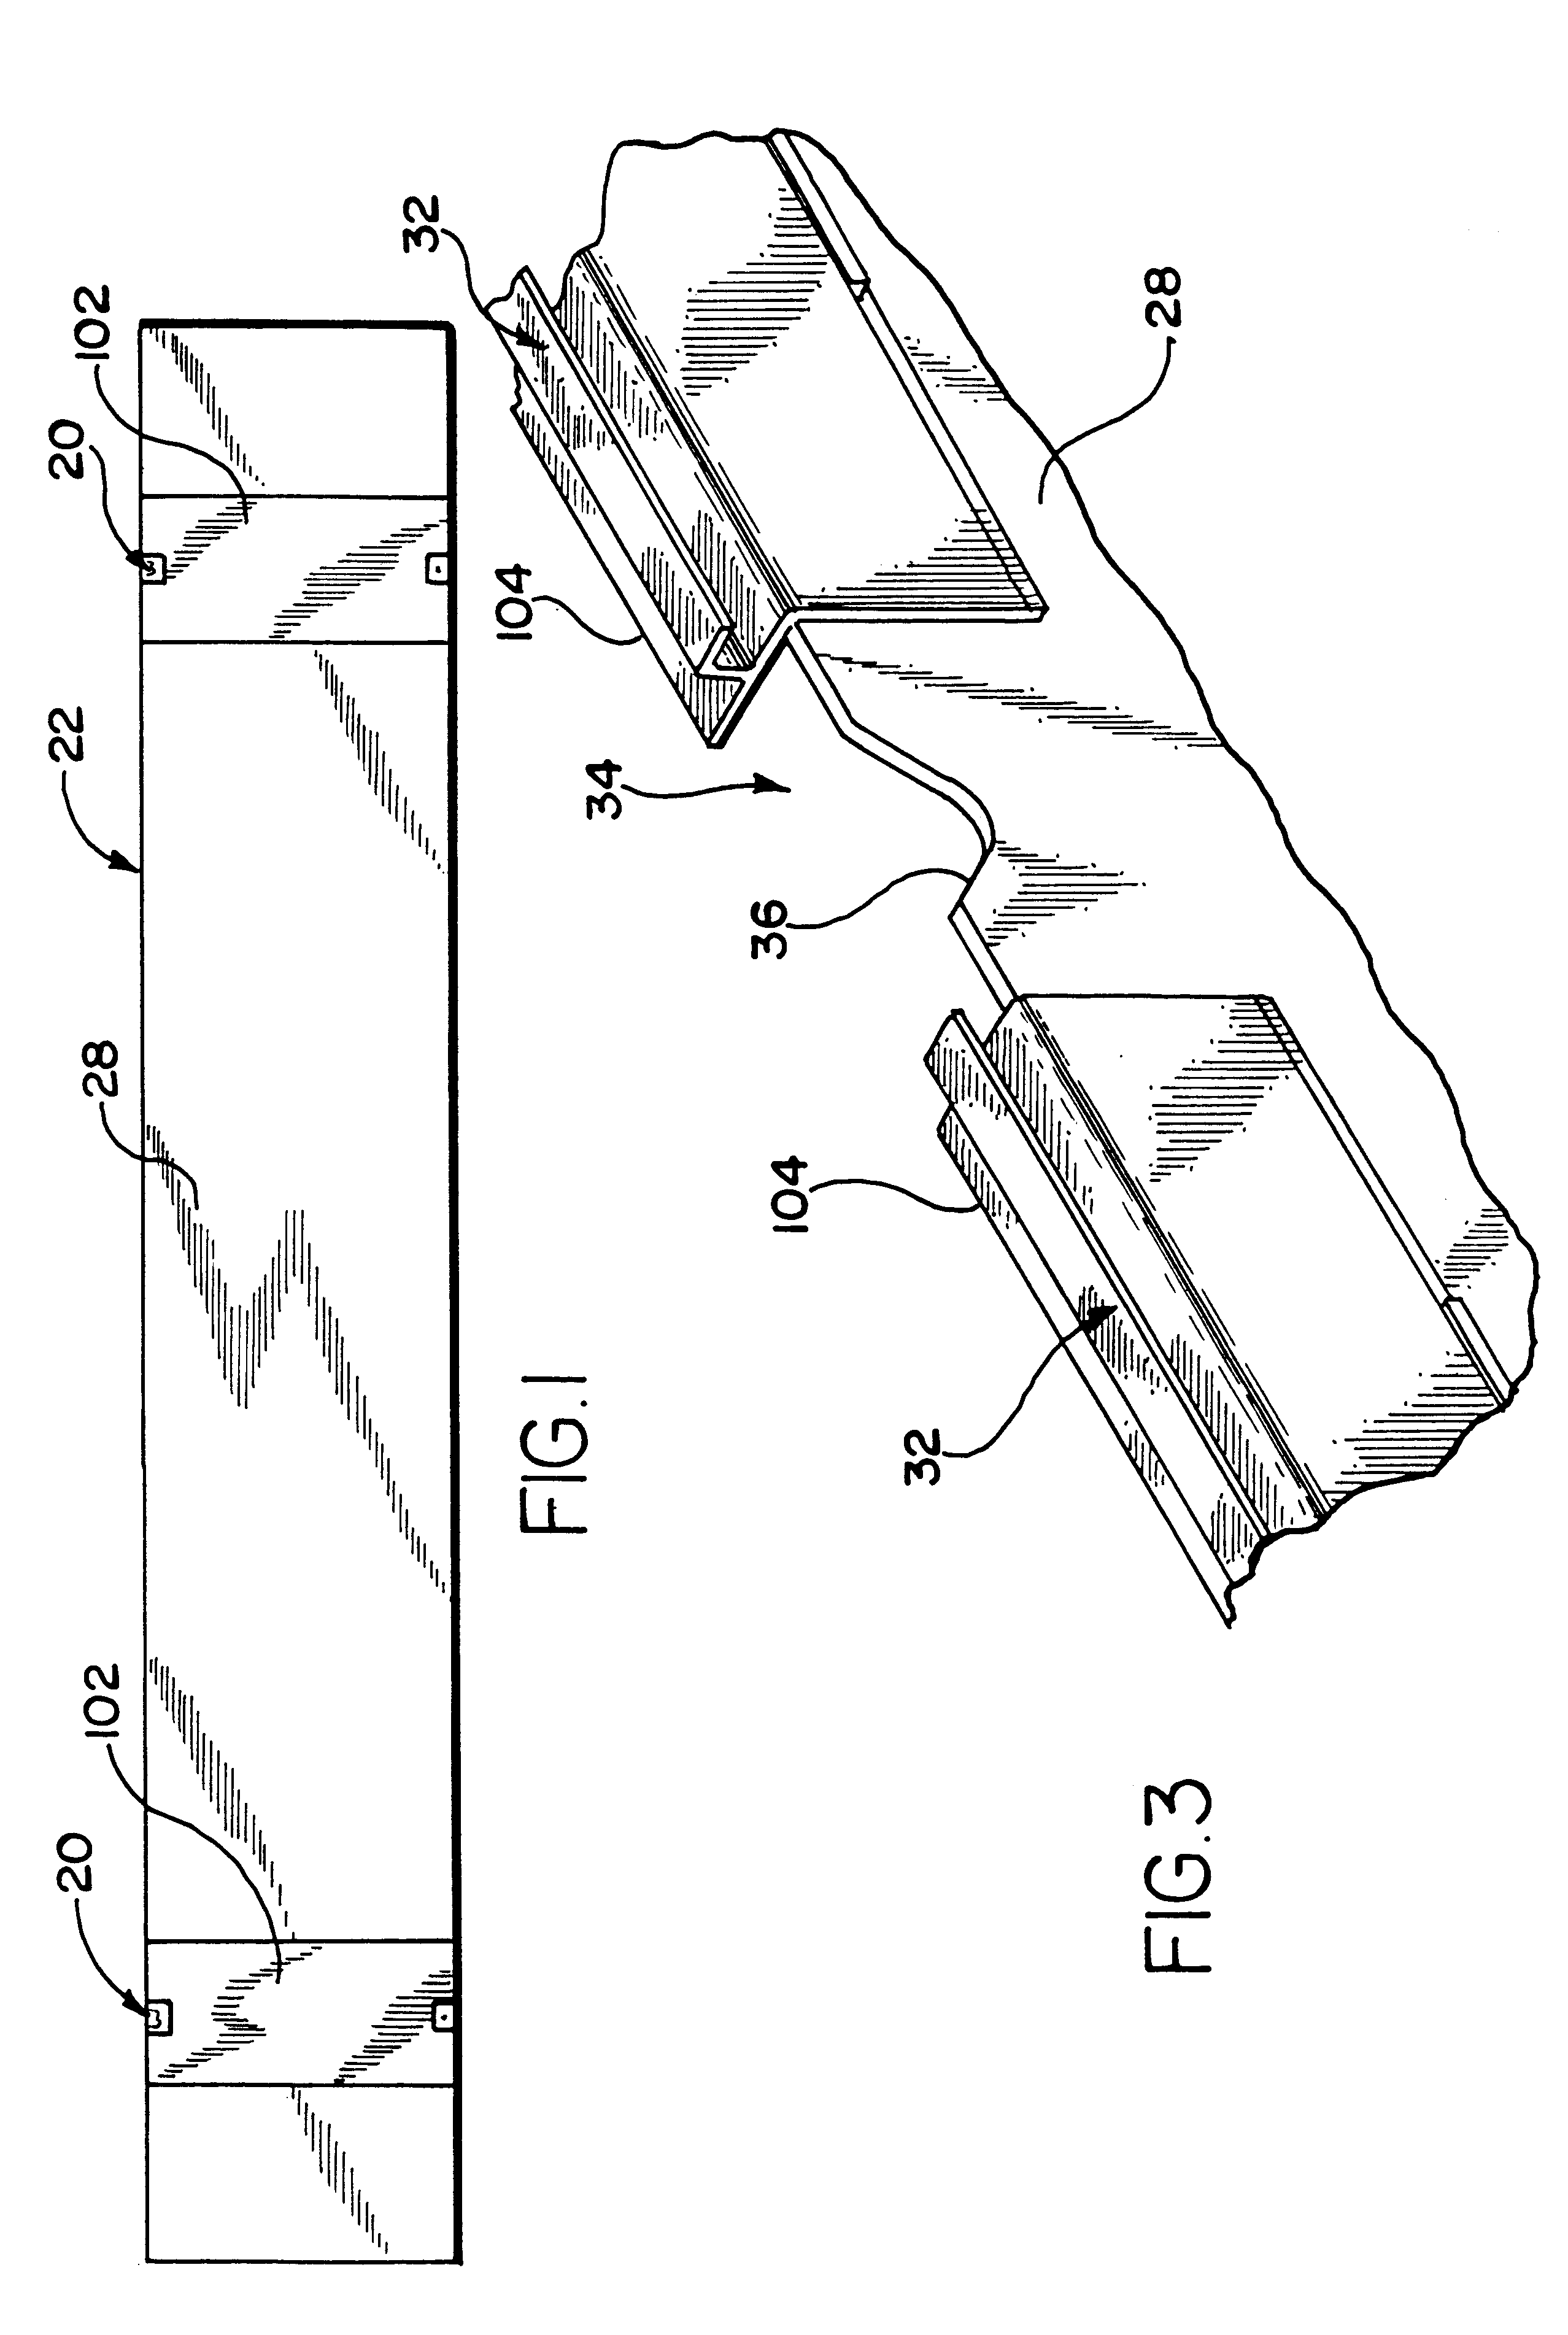 Multi-component lifting assembly for a container